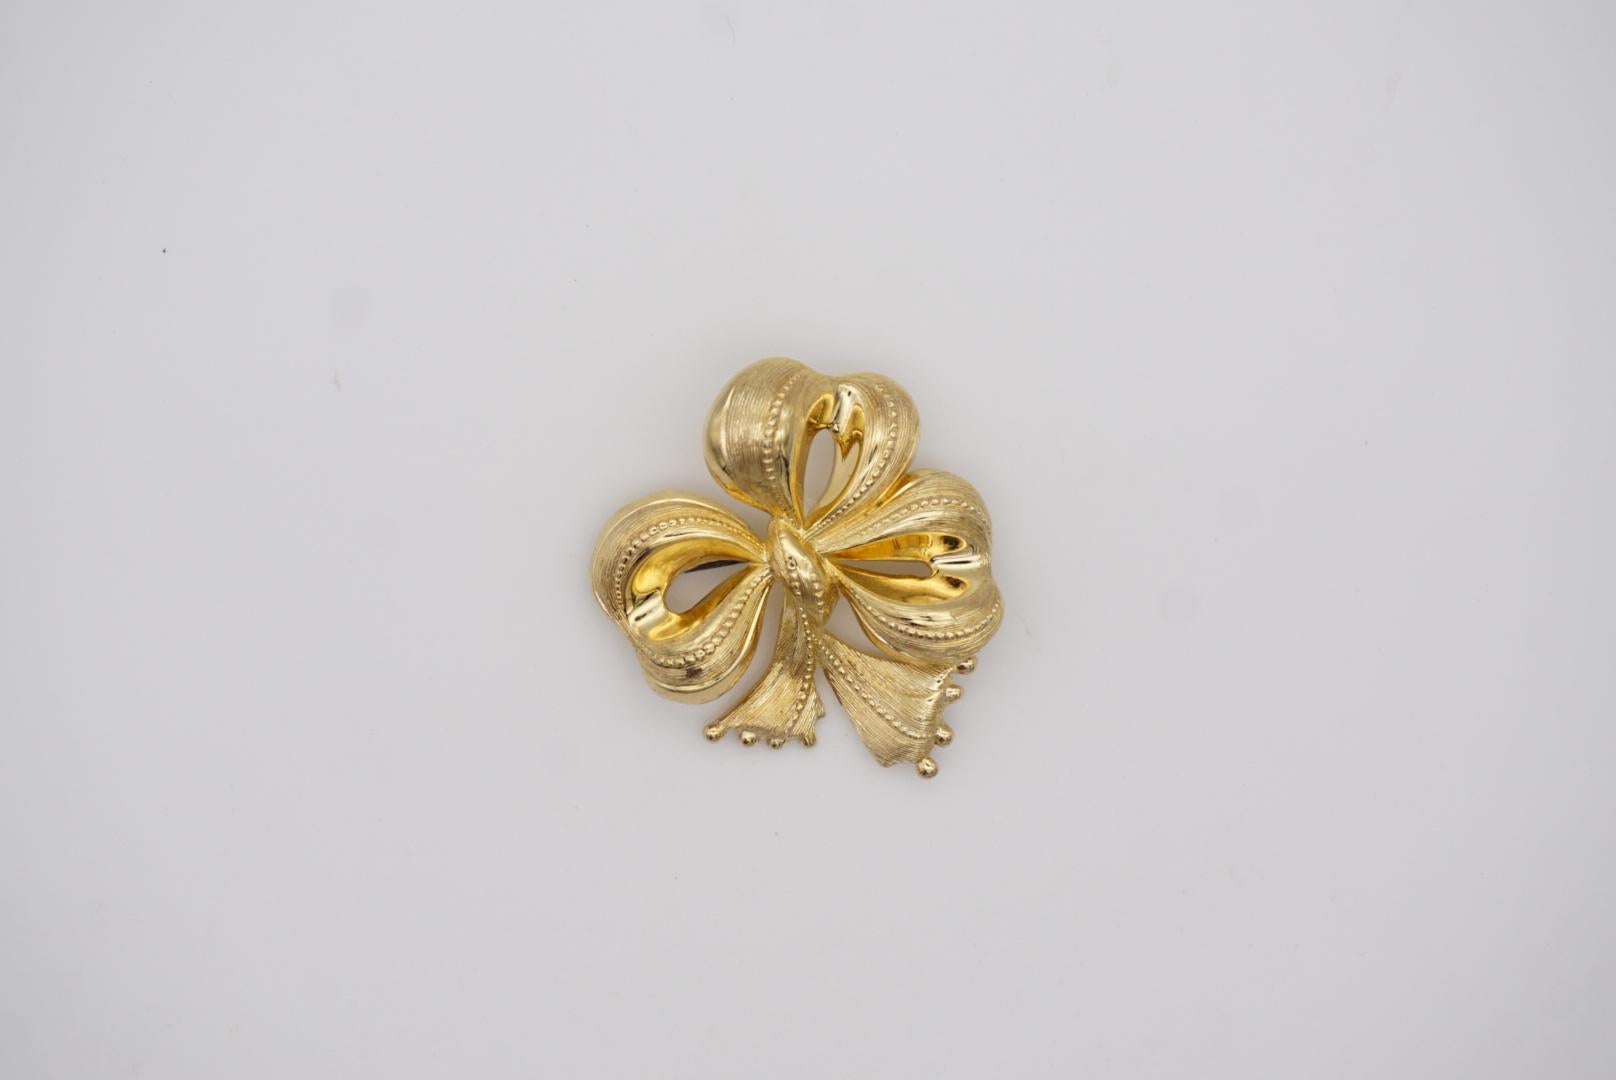 Christian Dior 1970s Vintage Ribbon Present Gift Knot Bow Heart Love Gold Brooch In Excellent Condition For Sale In Wokingham, England